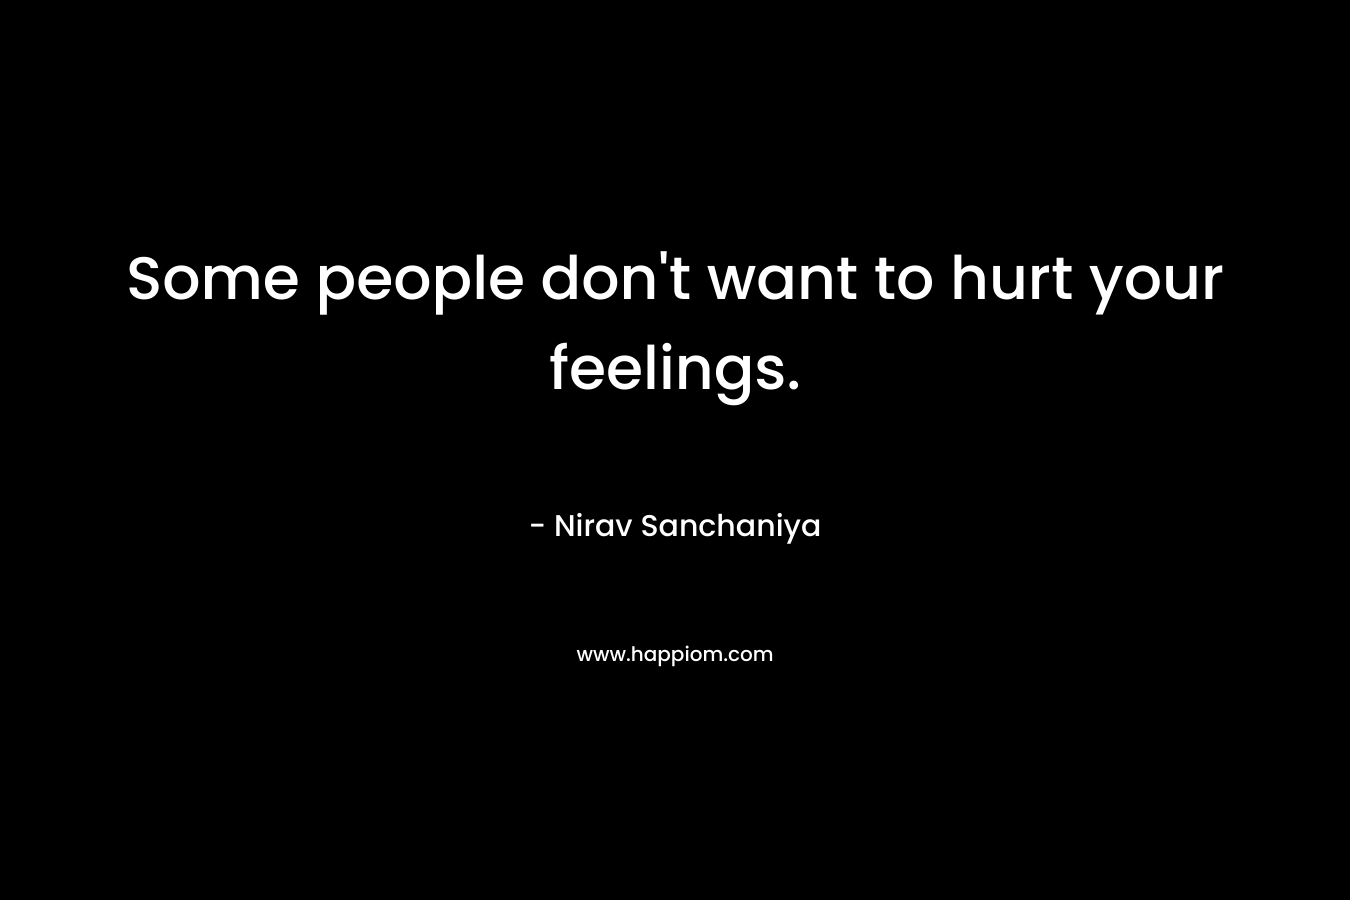 Some people don't want to hurt your feelings.